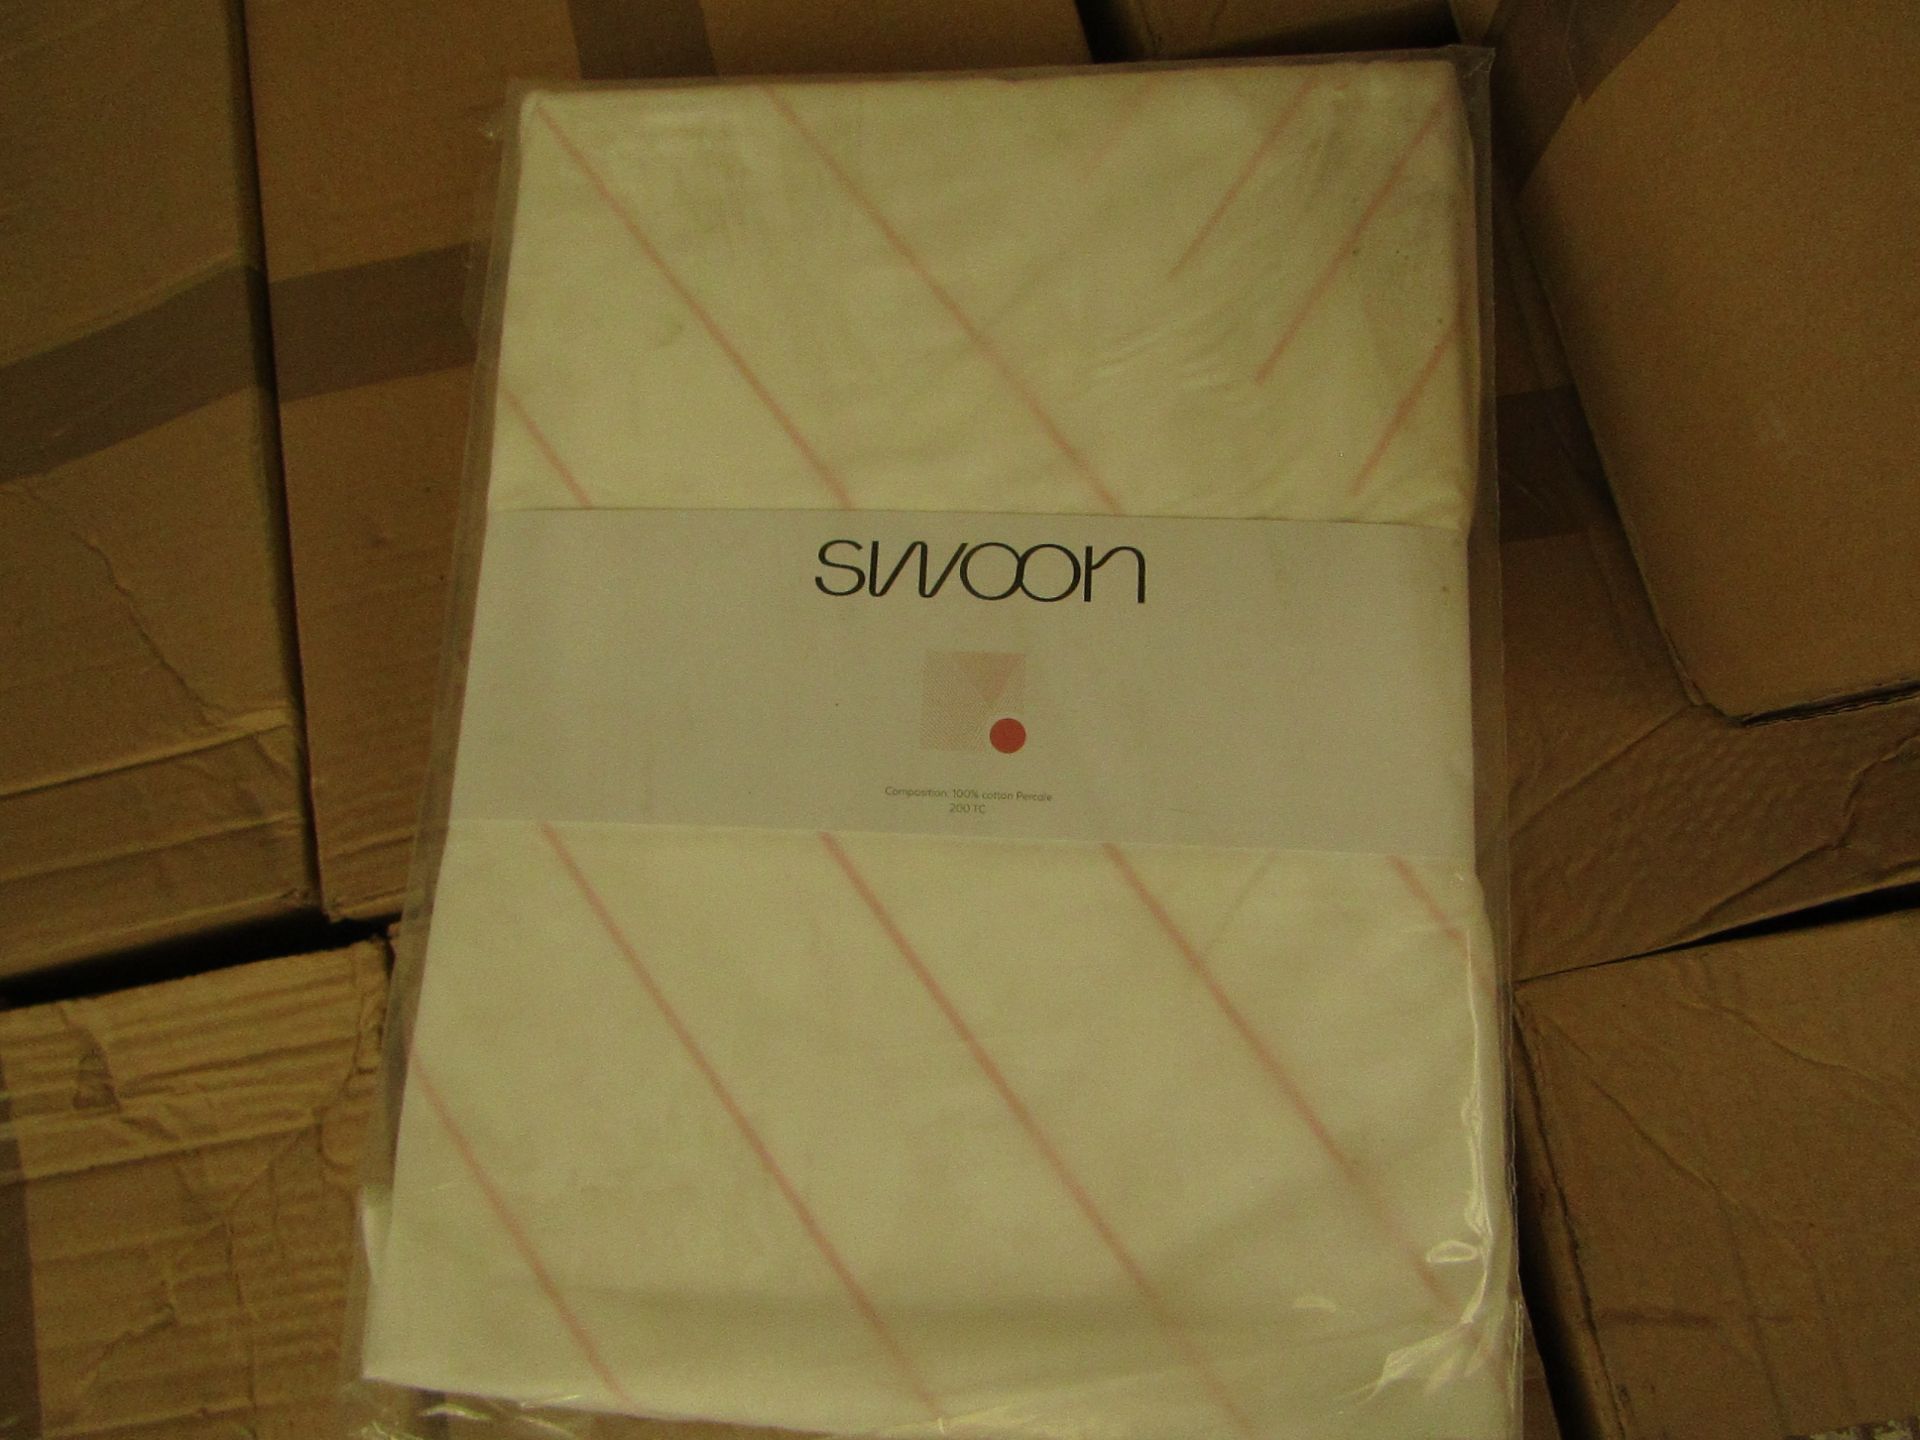 | 8X | SWOON BOOLE PINK DOUBLE DUVET SET THAT INCLUDE DUVET COVER AND 2 MATCHING PILLOW CASES |